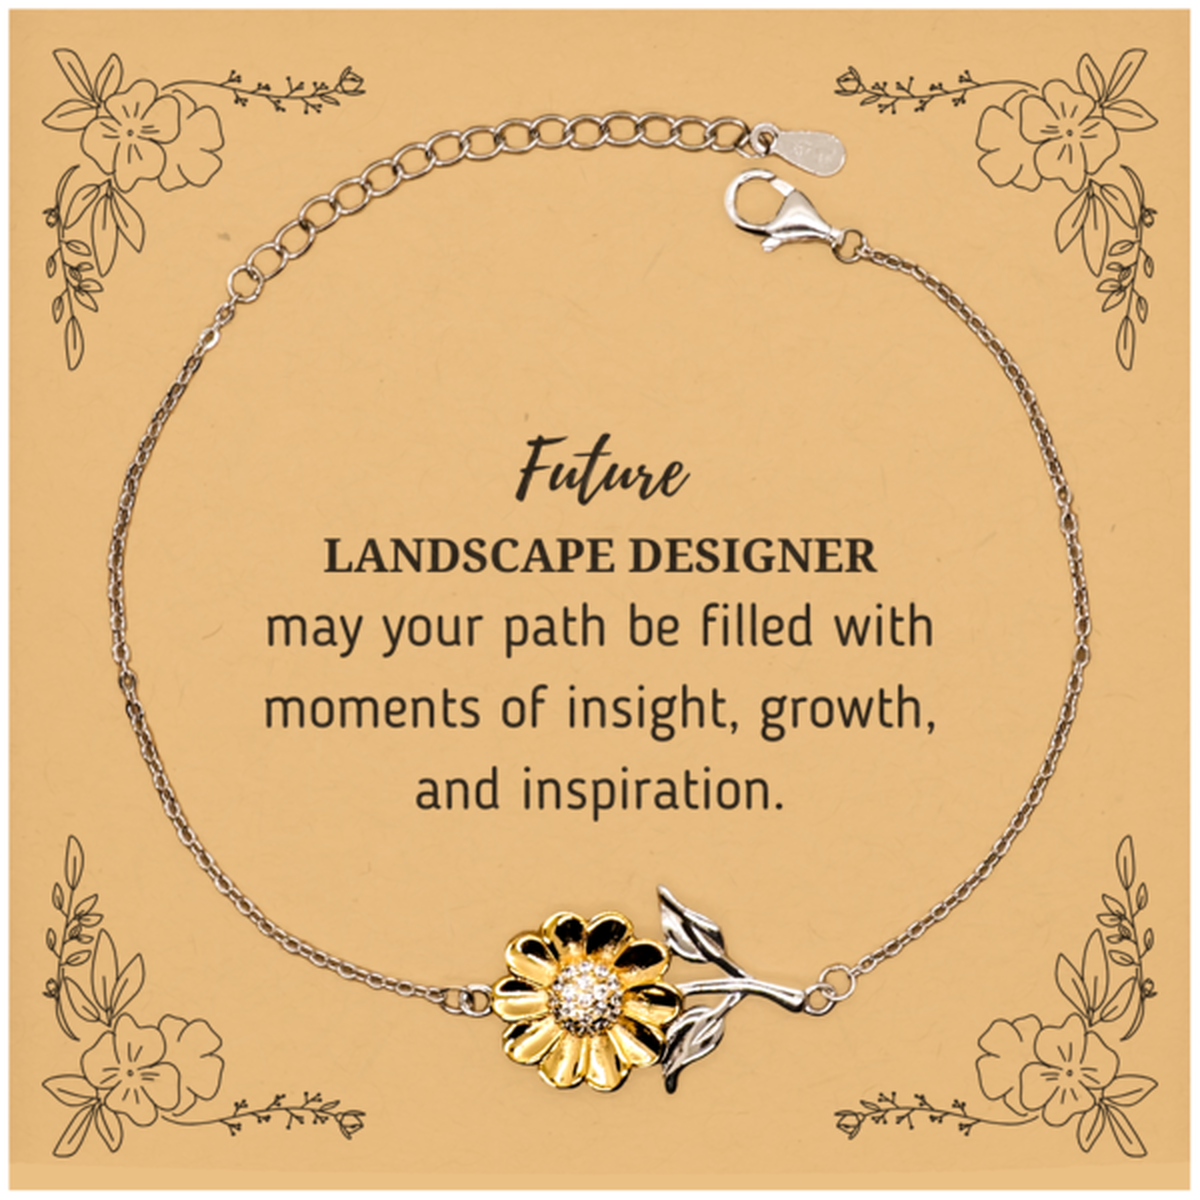 Future Landscape Designer Gifts, May your path be filled with moments of insight, Graduation Gifts for New Landscape Designer, Christmas Unique Sunflower Bracelet For Men, Women, Friends